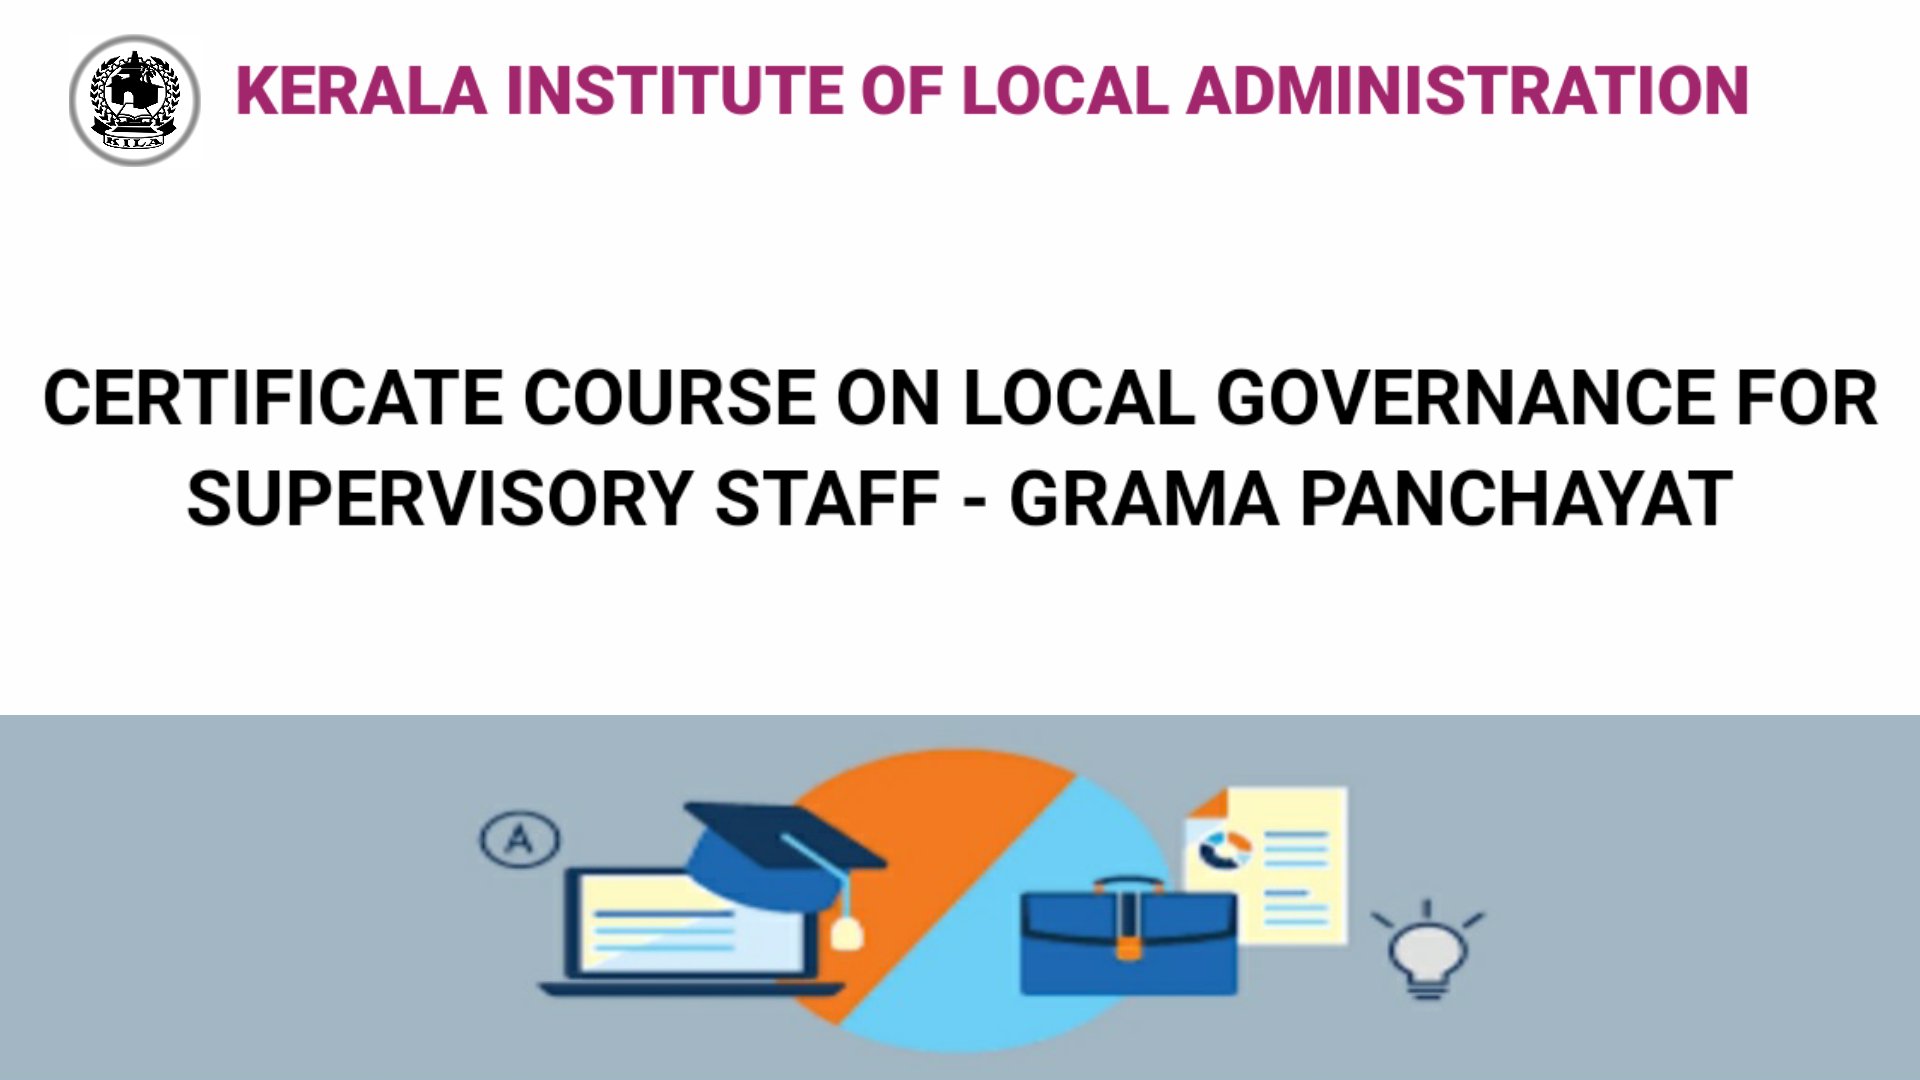 Certificate Course on Local Governance for Supervisory Staff - Grama Panchayat